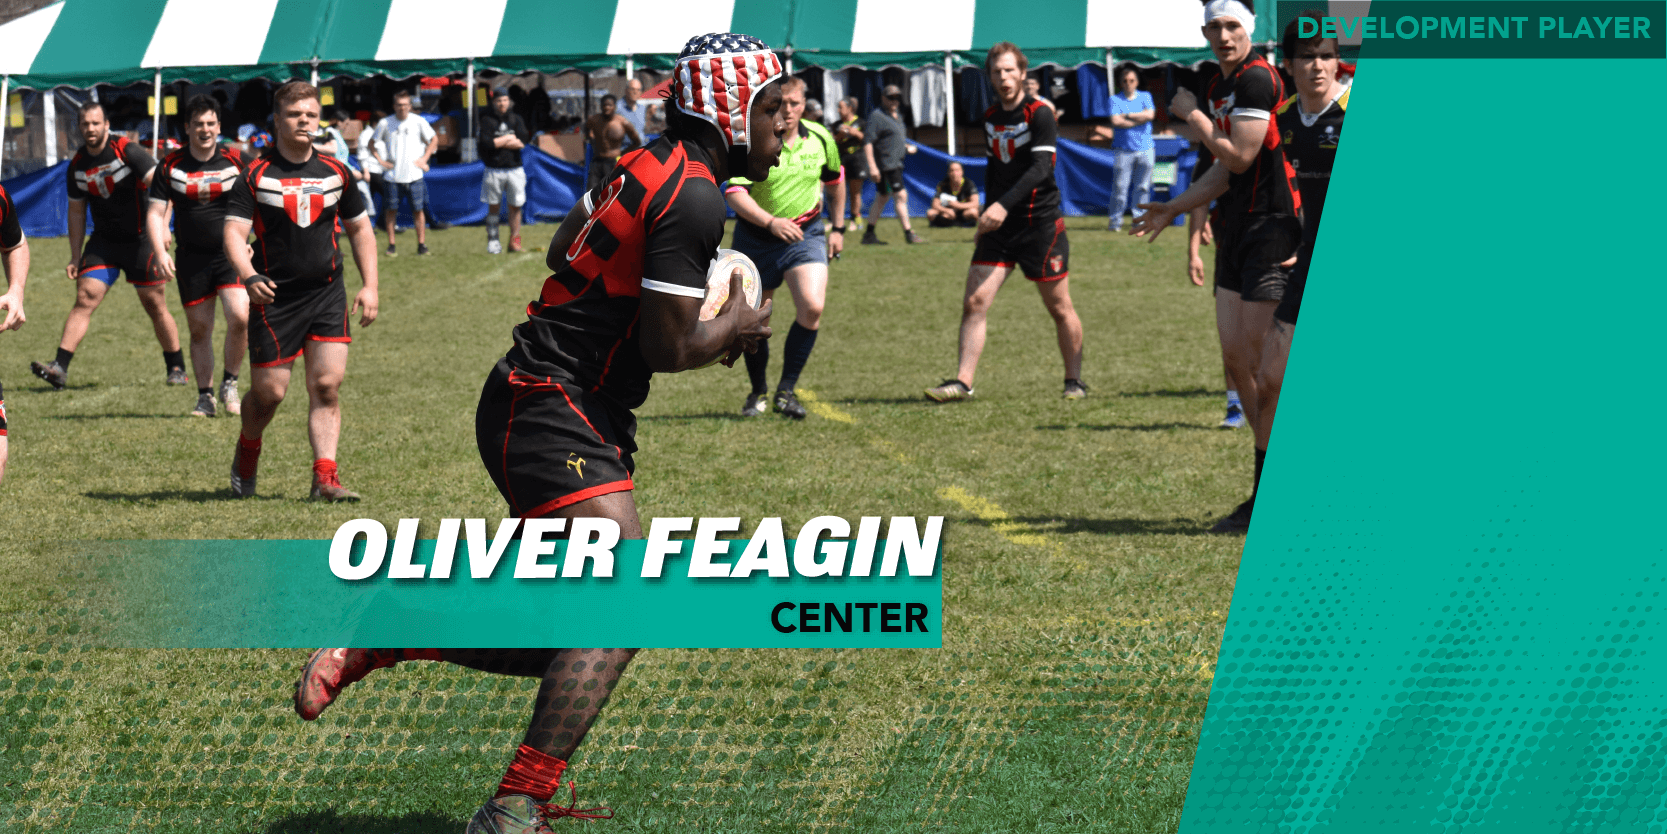 Oliver Feagin Joins as Development Player